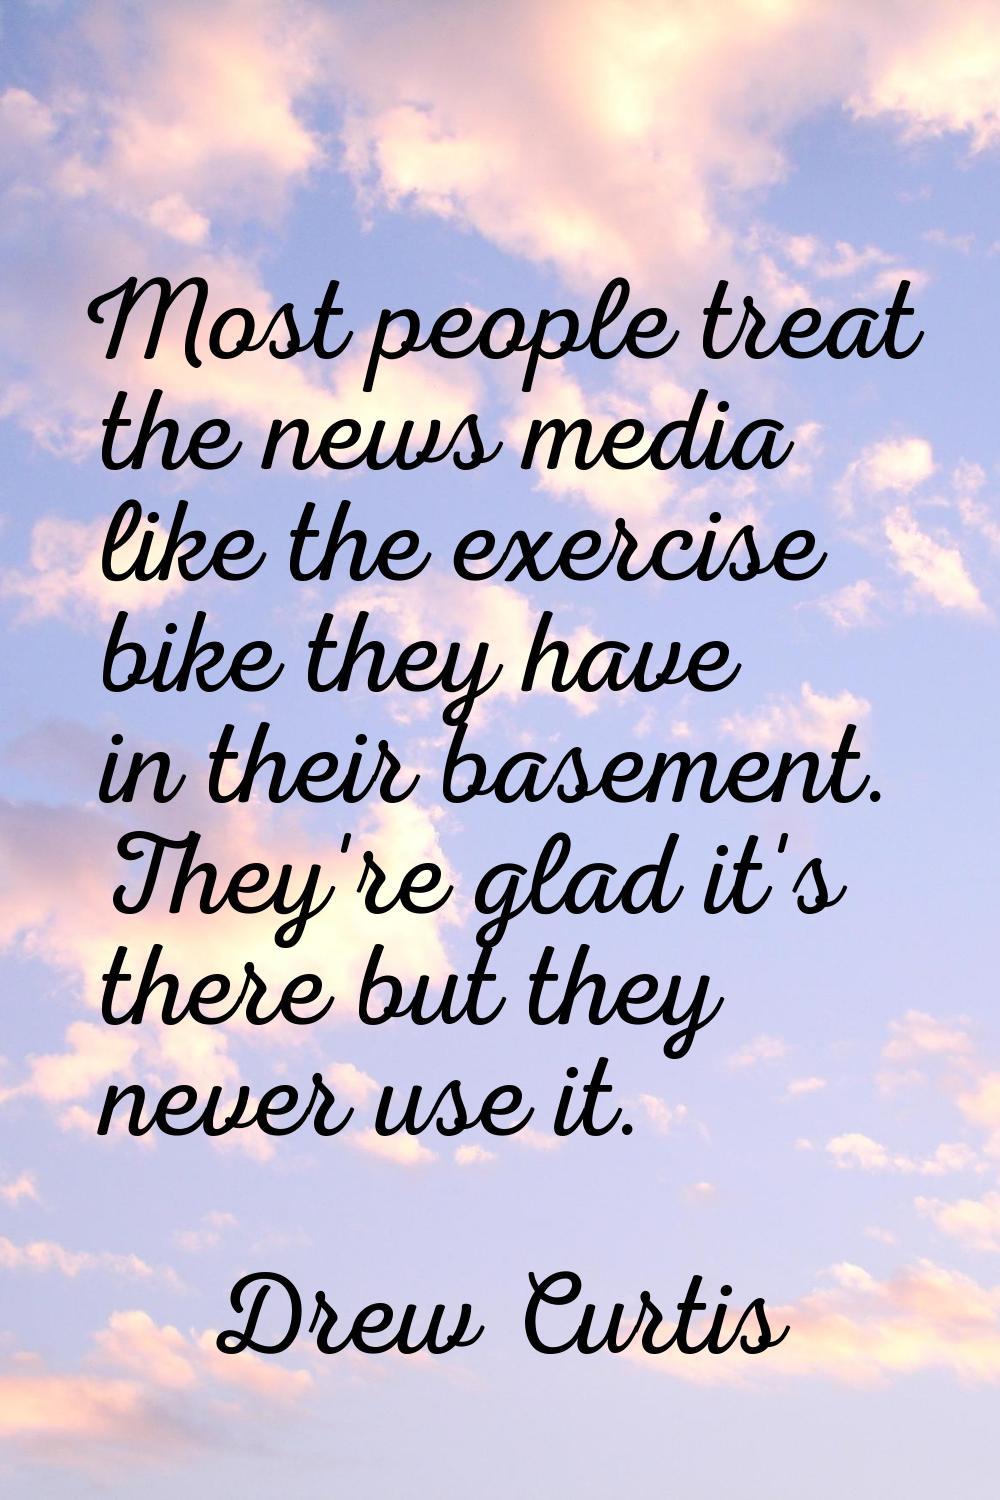 Most people treat the news media like the exercise bike they have in their basement. They're glad i